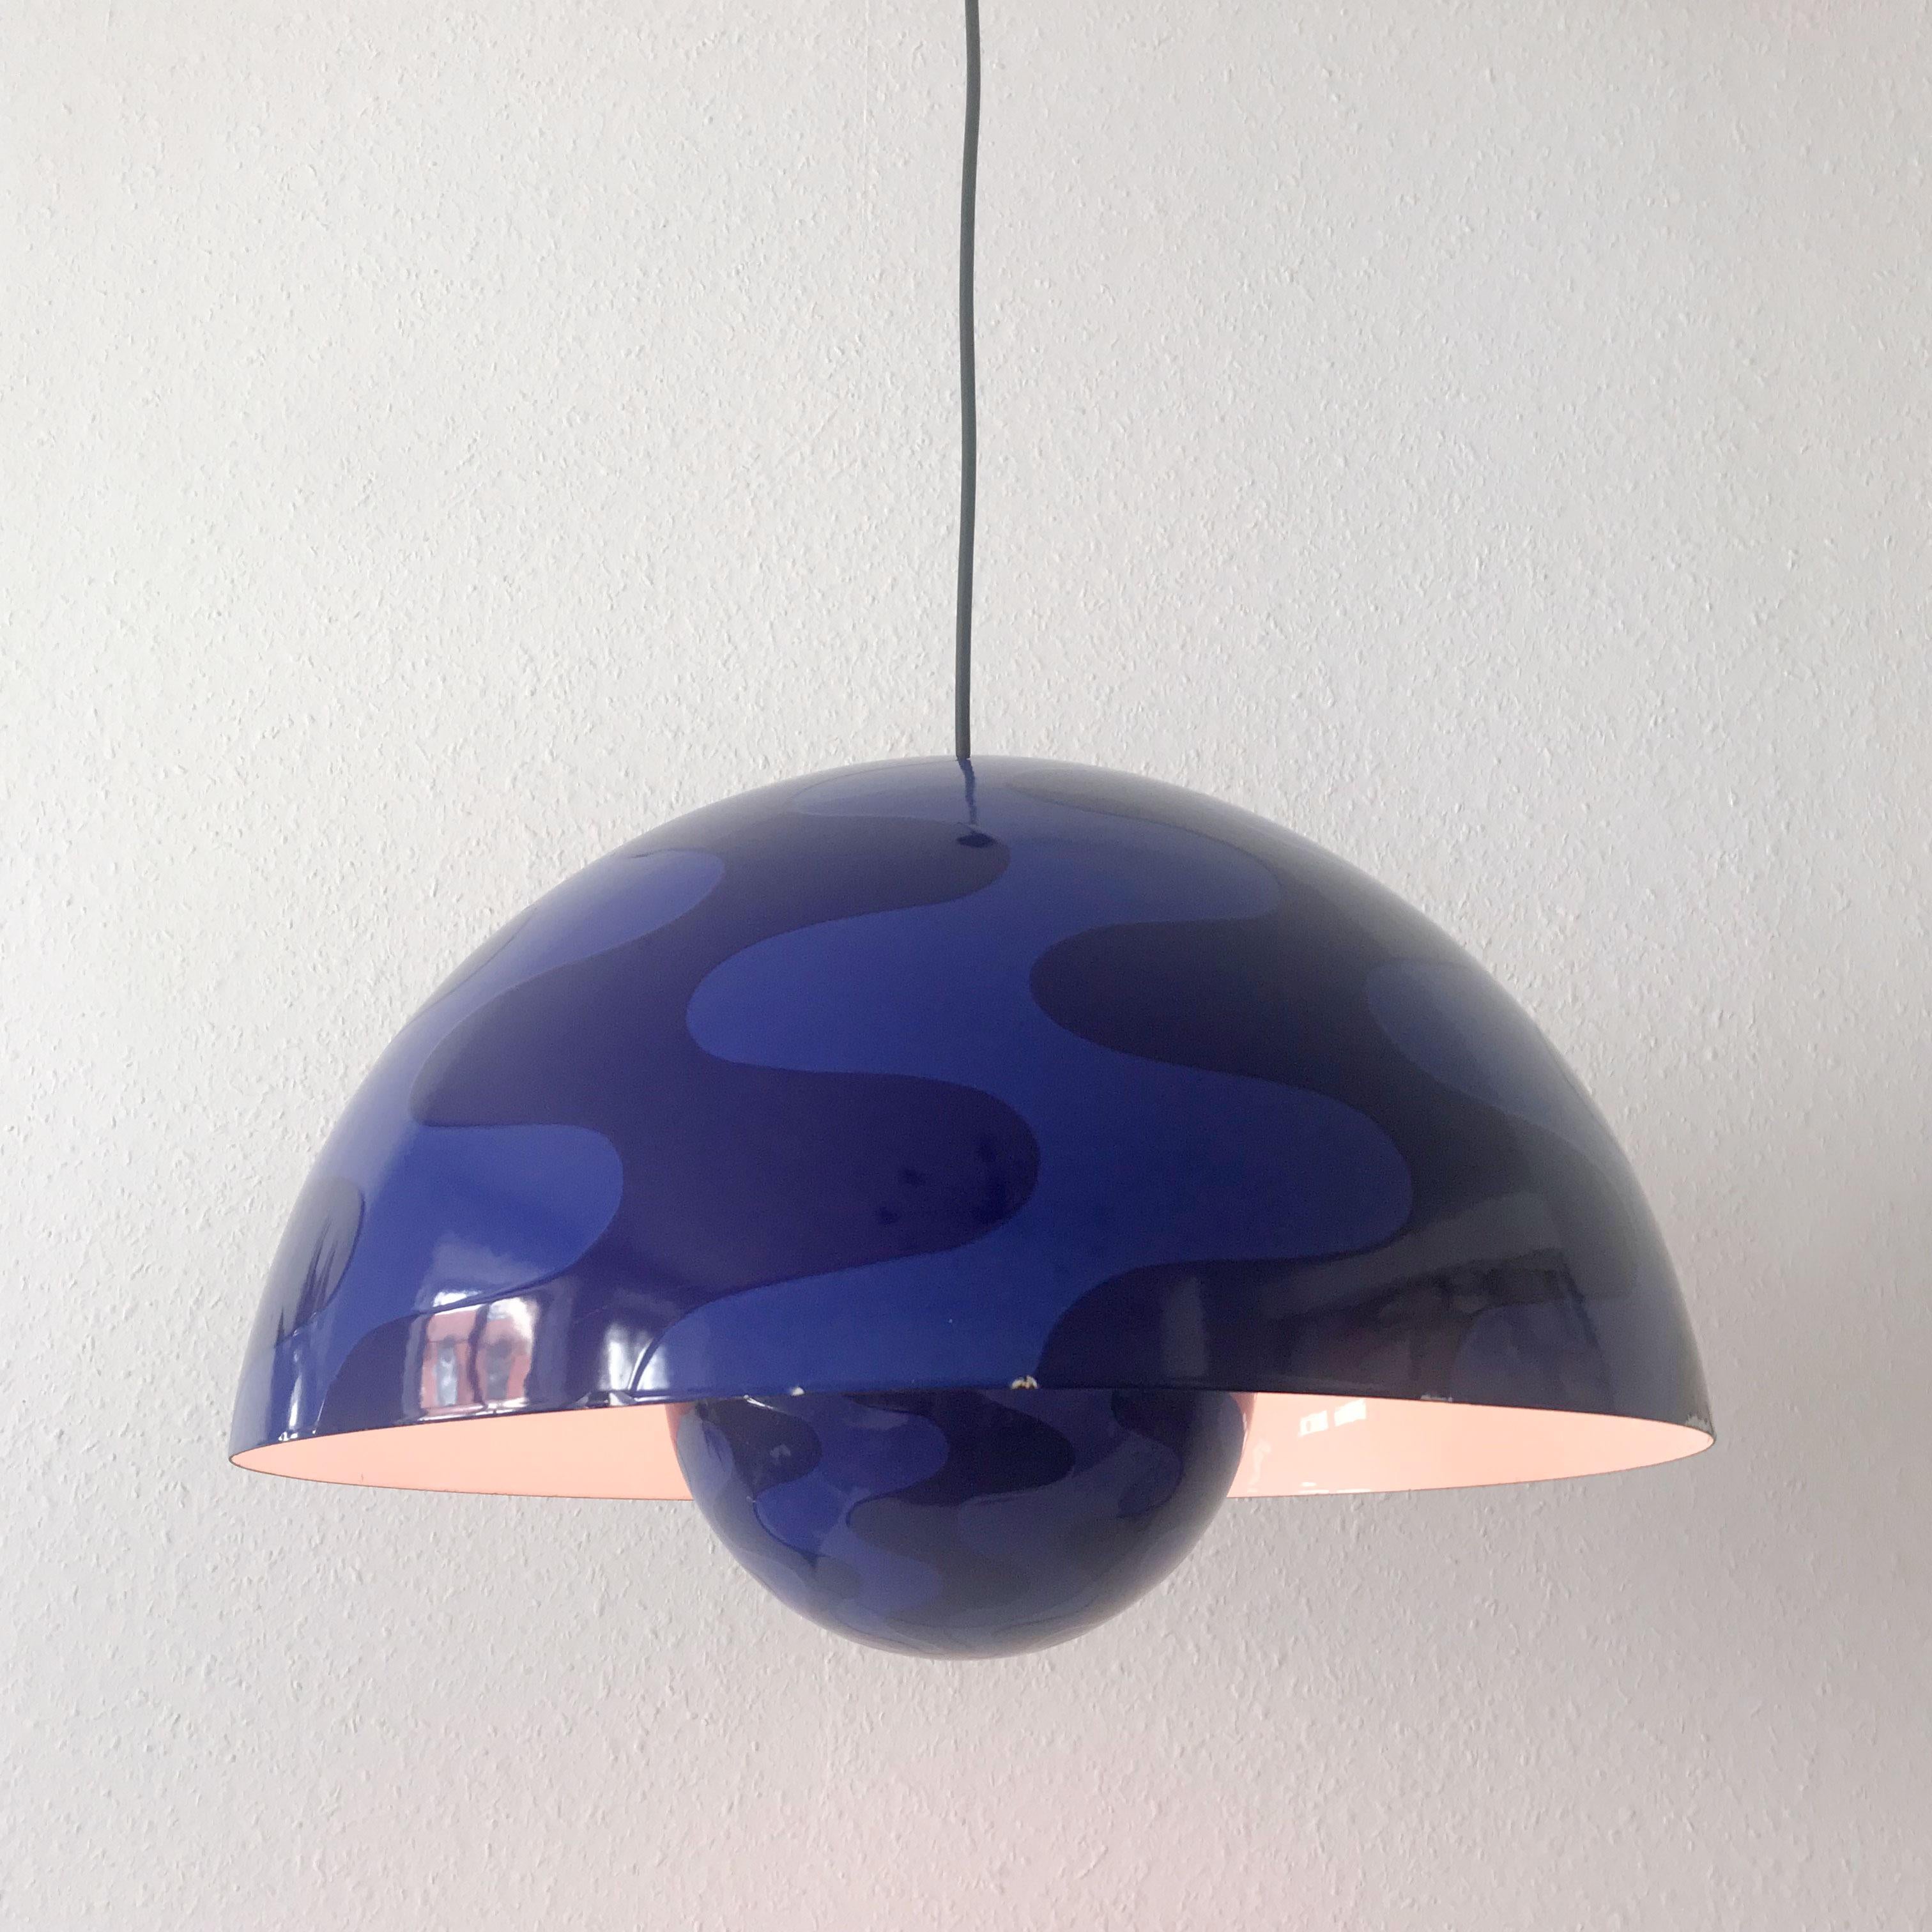 Extremely rare and large Mid-Century Modern flower pot pendant lamp with two-toned psychedelic pattern in exceptional blue color. Designed by Verner Panton, 1971, Denmark. Manufactured by Louis Poulsen, Copenhagen, Denmark, 1970s.

Executed in